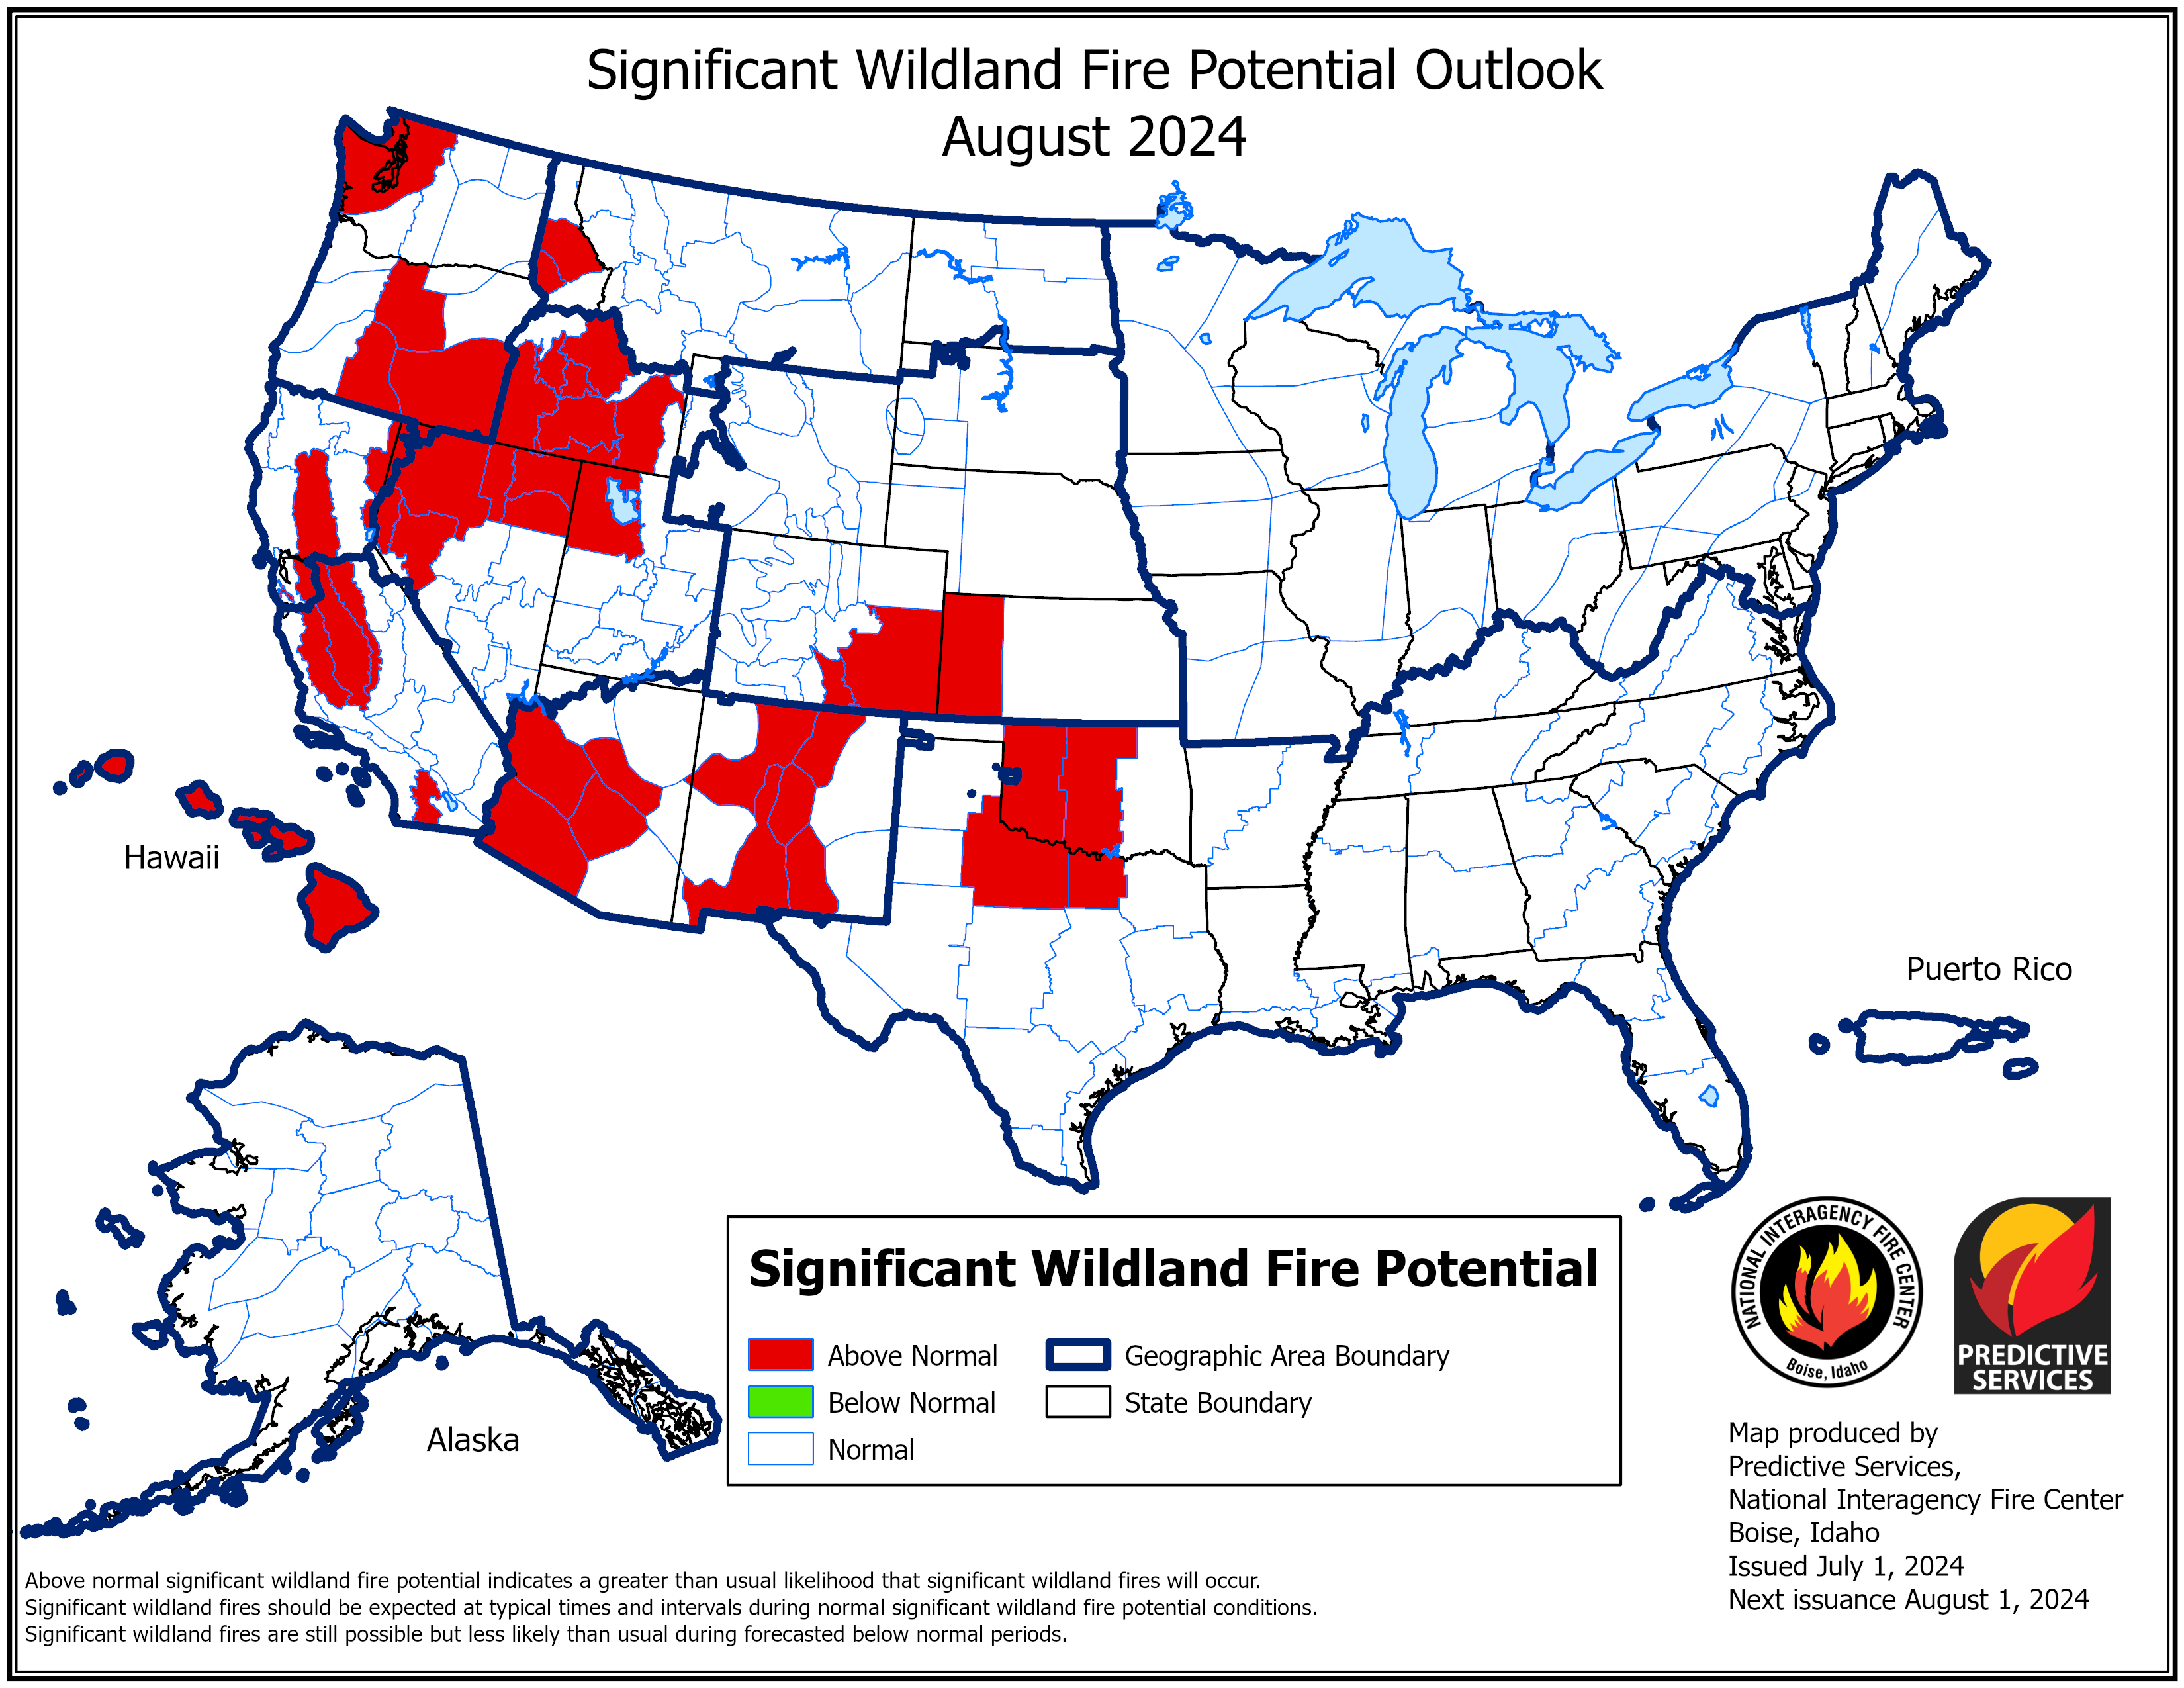 Significant Fire Potential Outlook Image for August